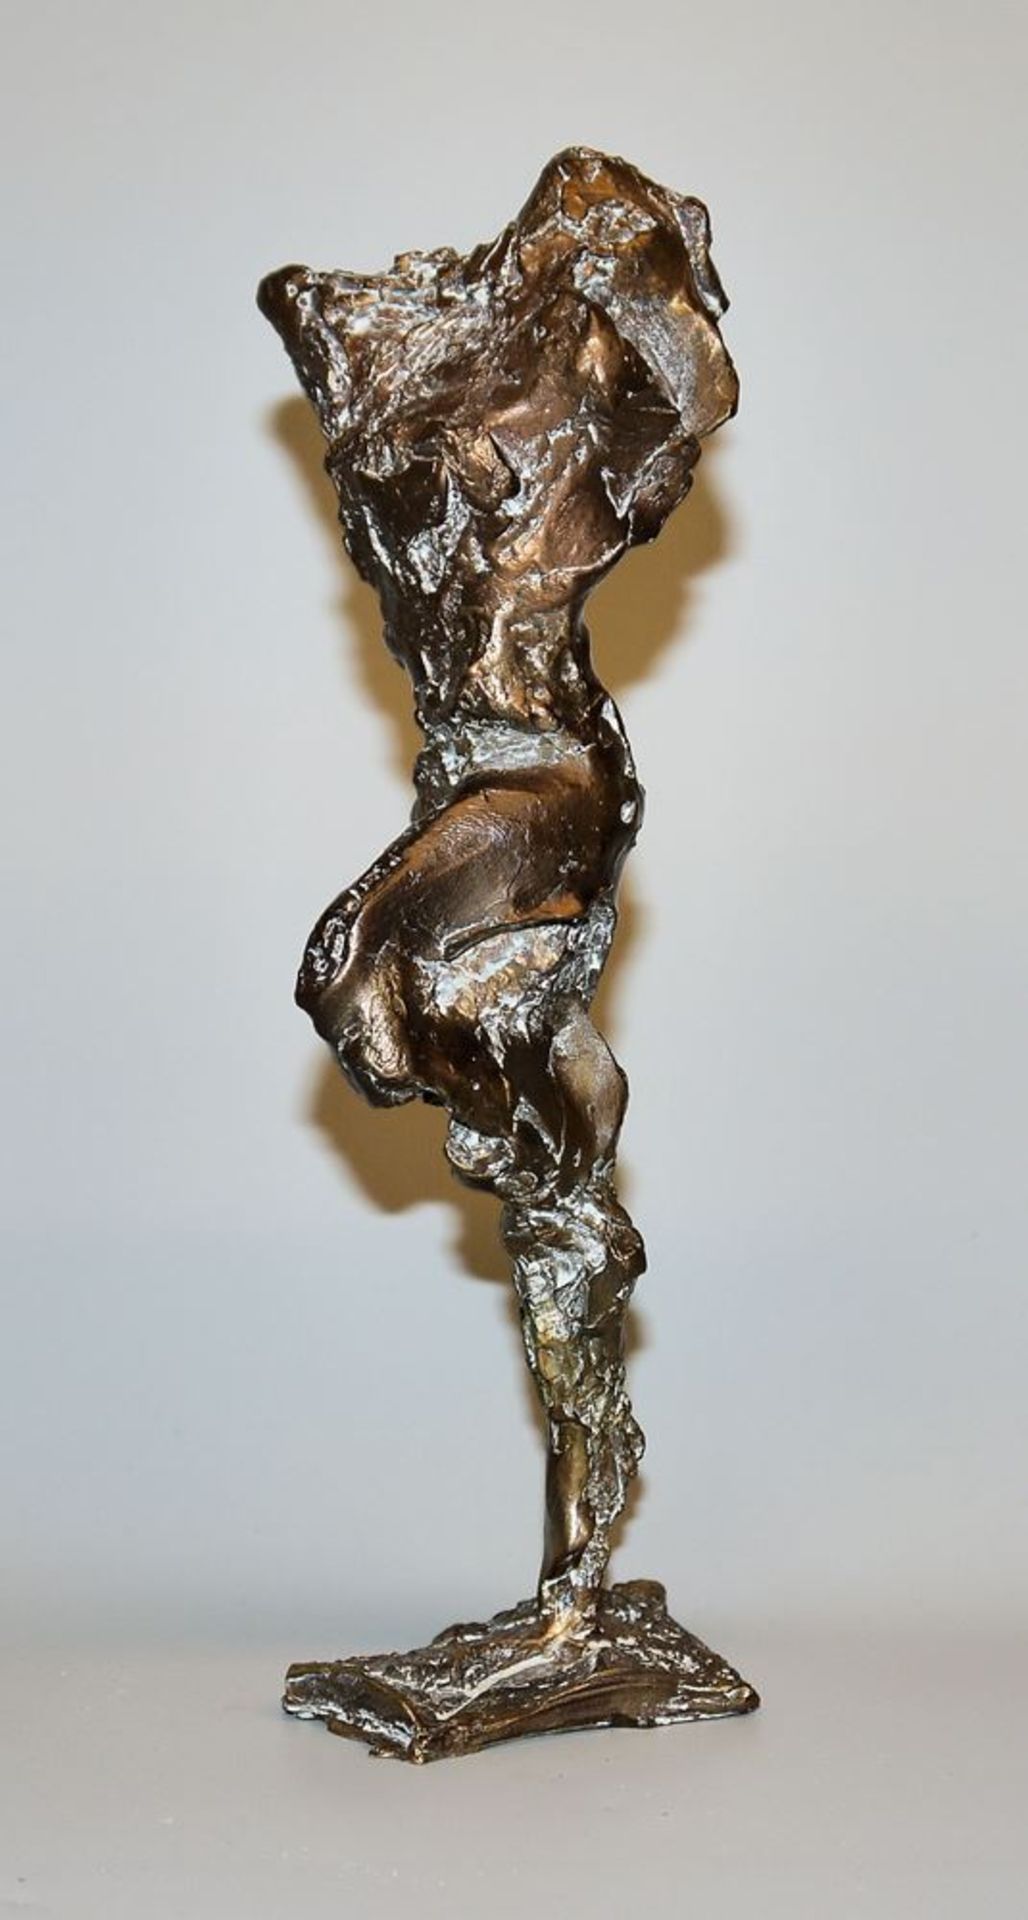 Karlheinz Oswald, Kleine Nike, signed bronze sculpture from (19)97/98, with catalogue